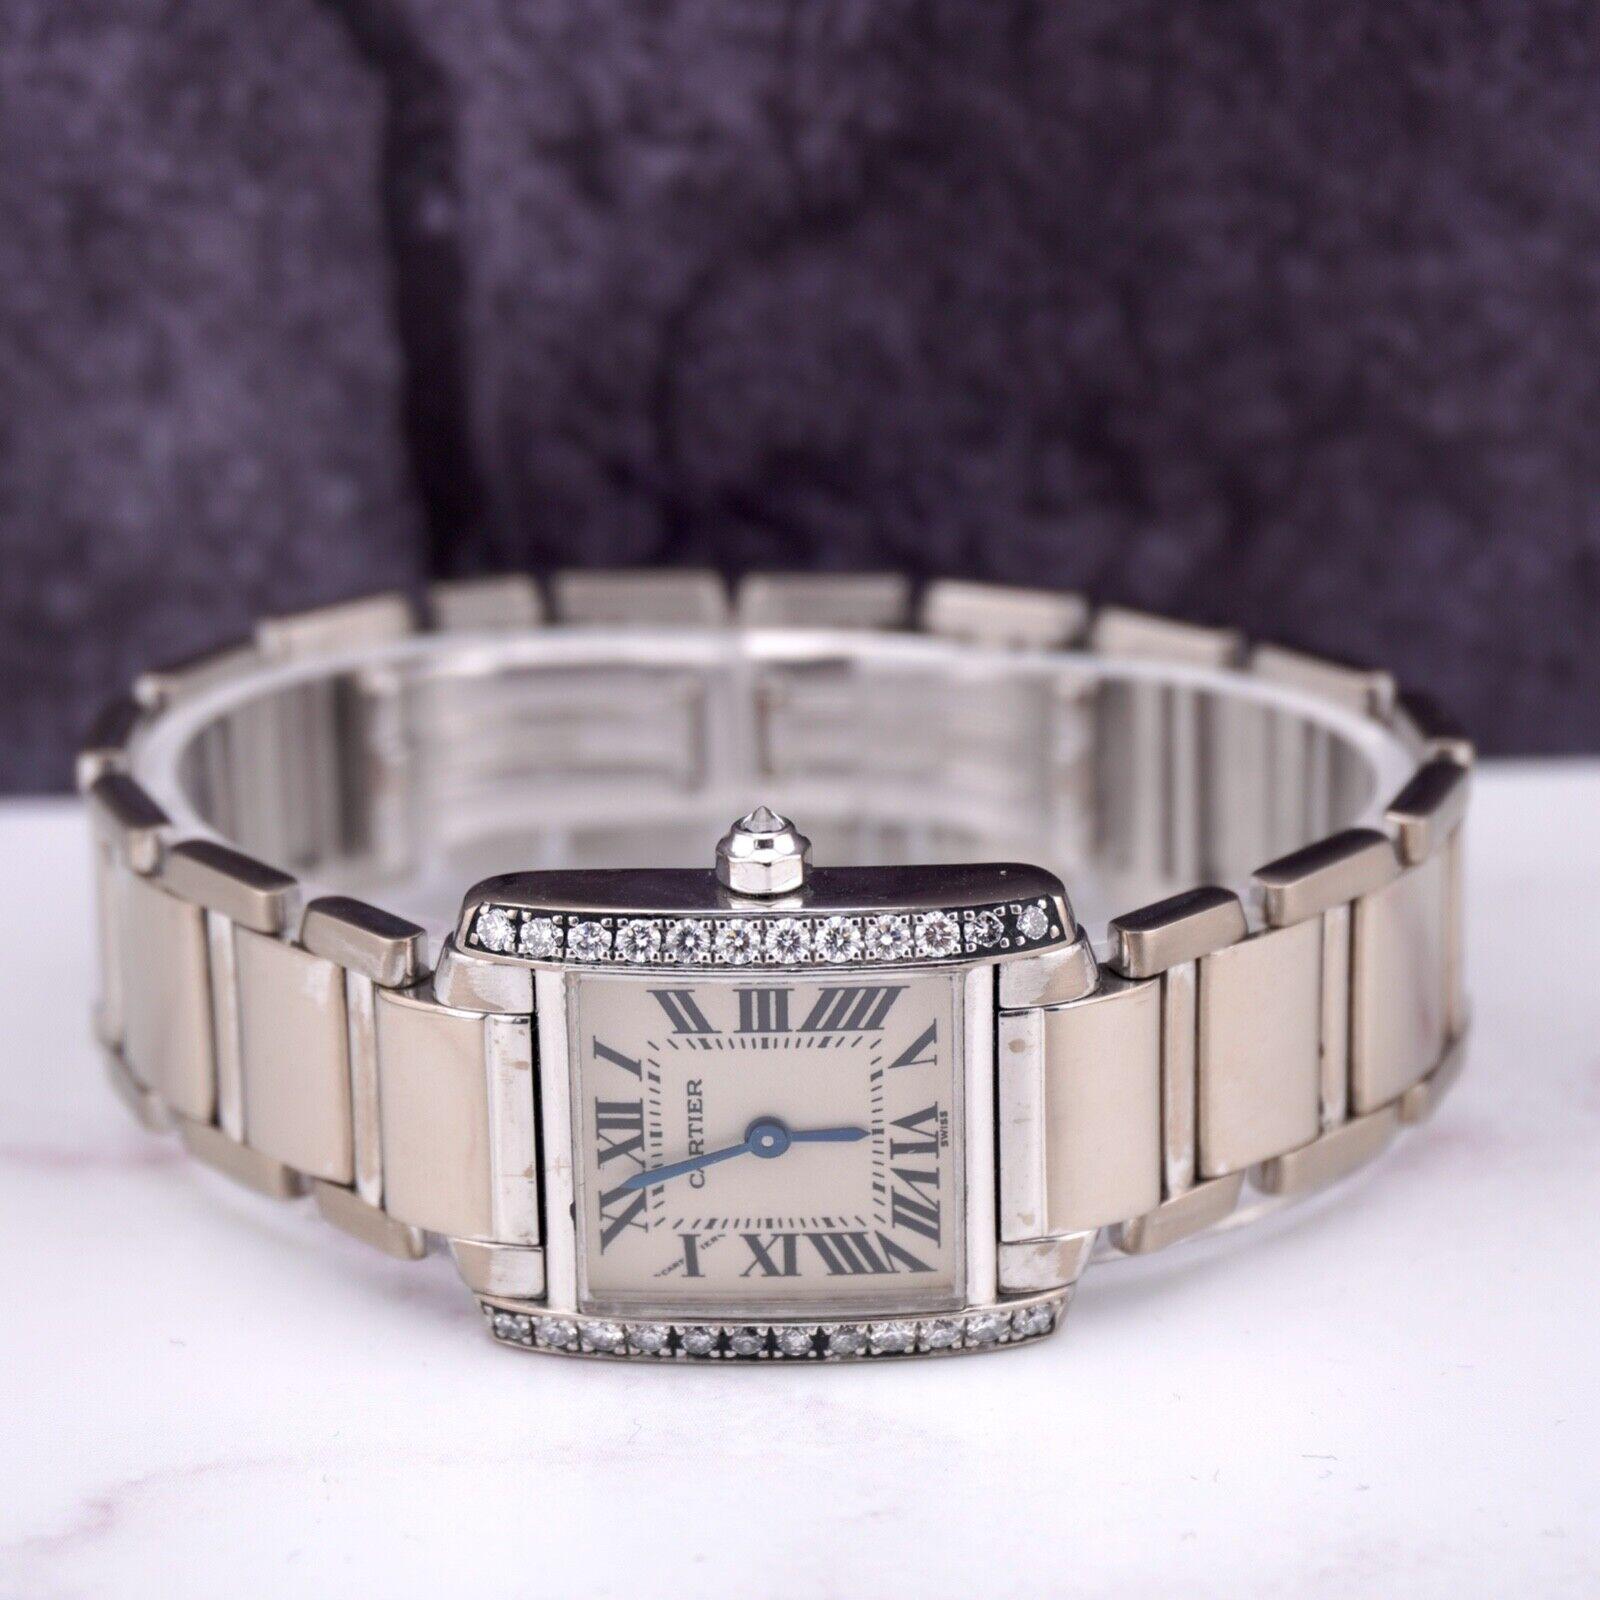 Cartier Tank Francaise 30mm Watch. A Pre-owned watch w/ Gift Box. Watch is 100% Authentic and Comes with Authenticity Card. Watch Reference is 2403 and is in Good Condition (See Pictures). The dial color is While is and material is 18k White Gold.